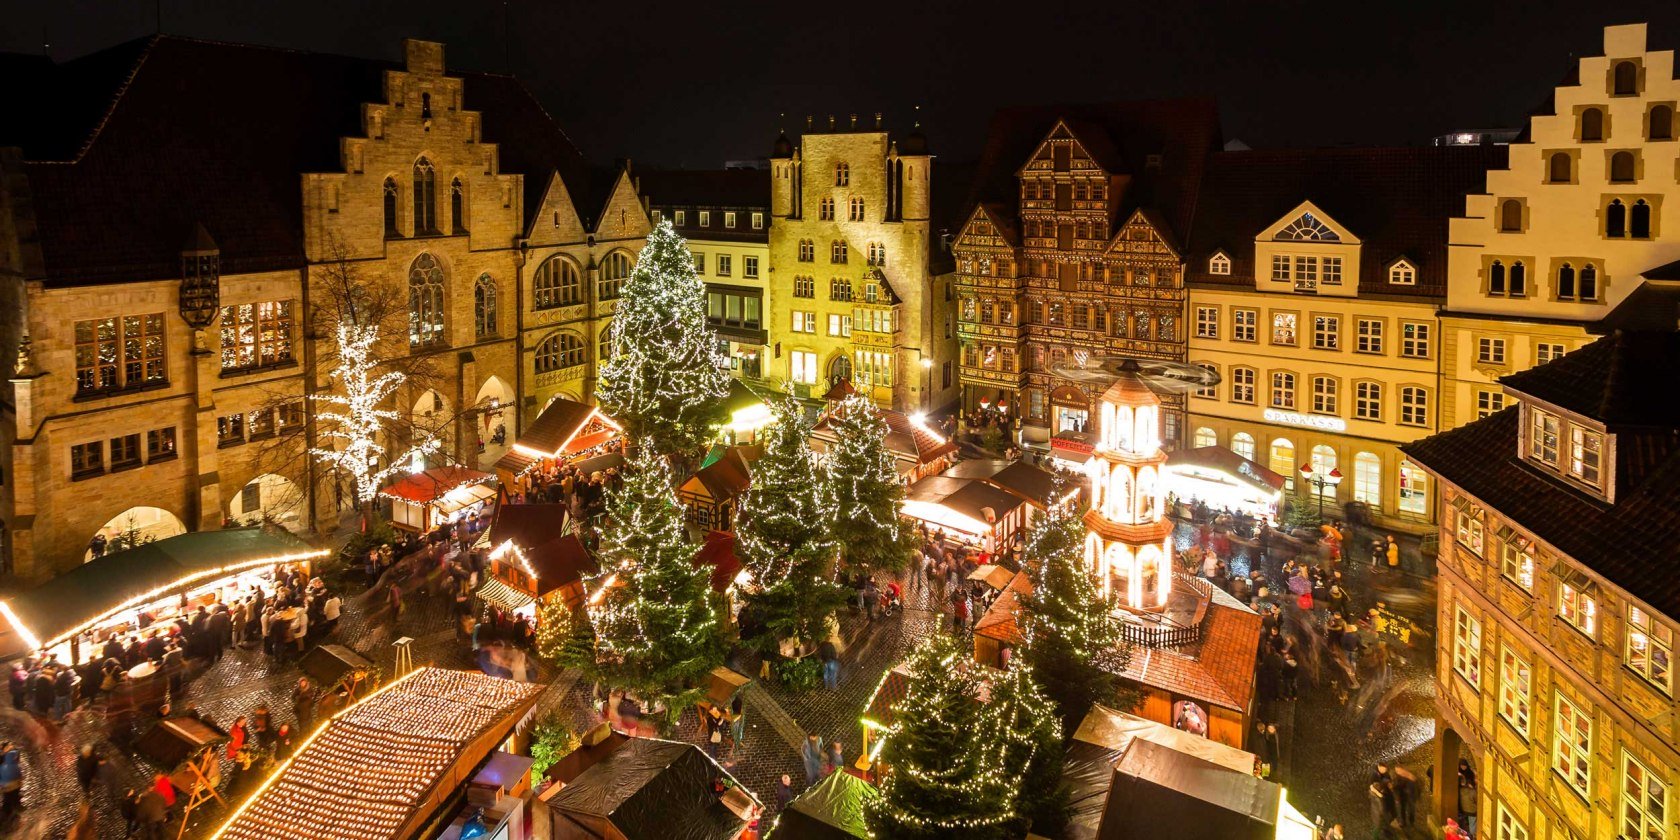 “This weekend sees the opening of many of Switzerland's famous Xmas...